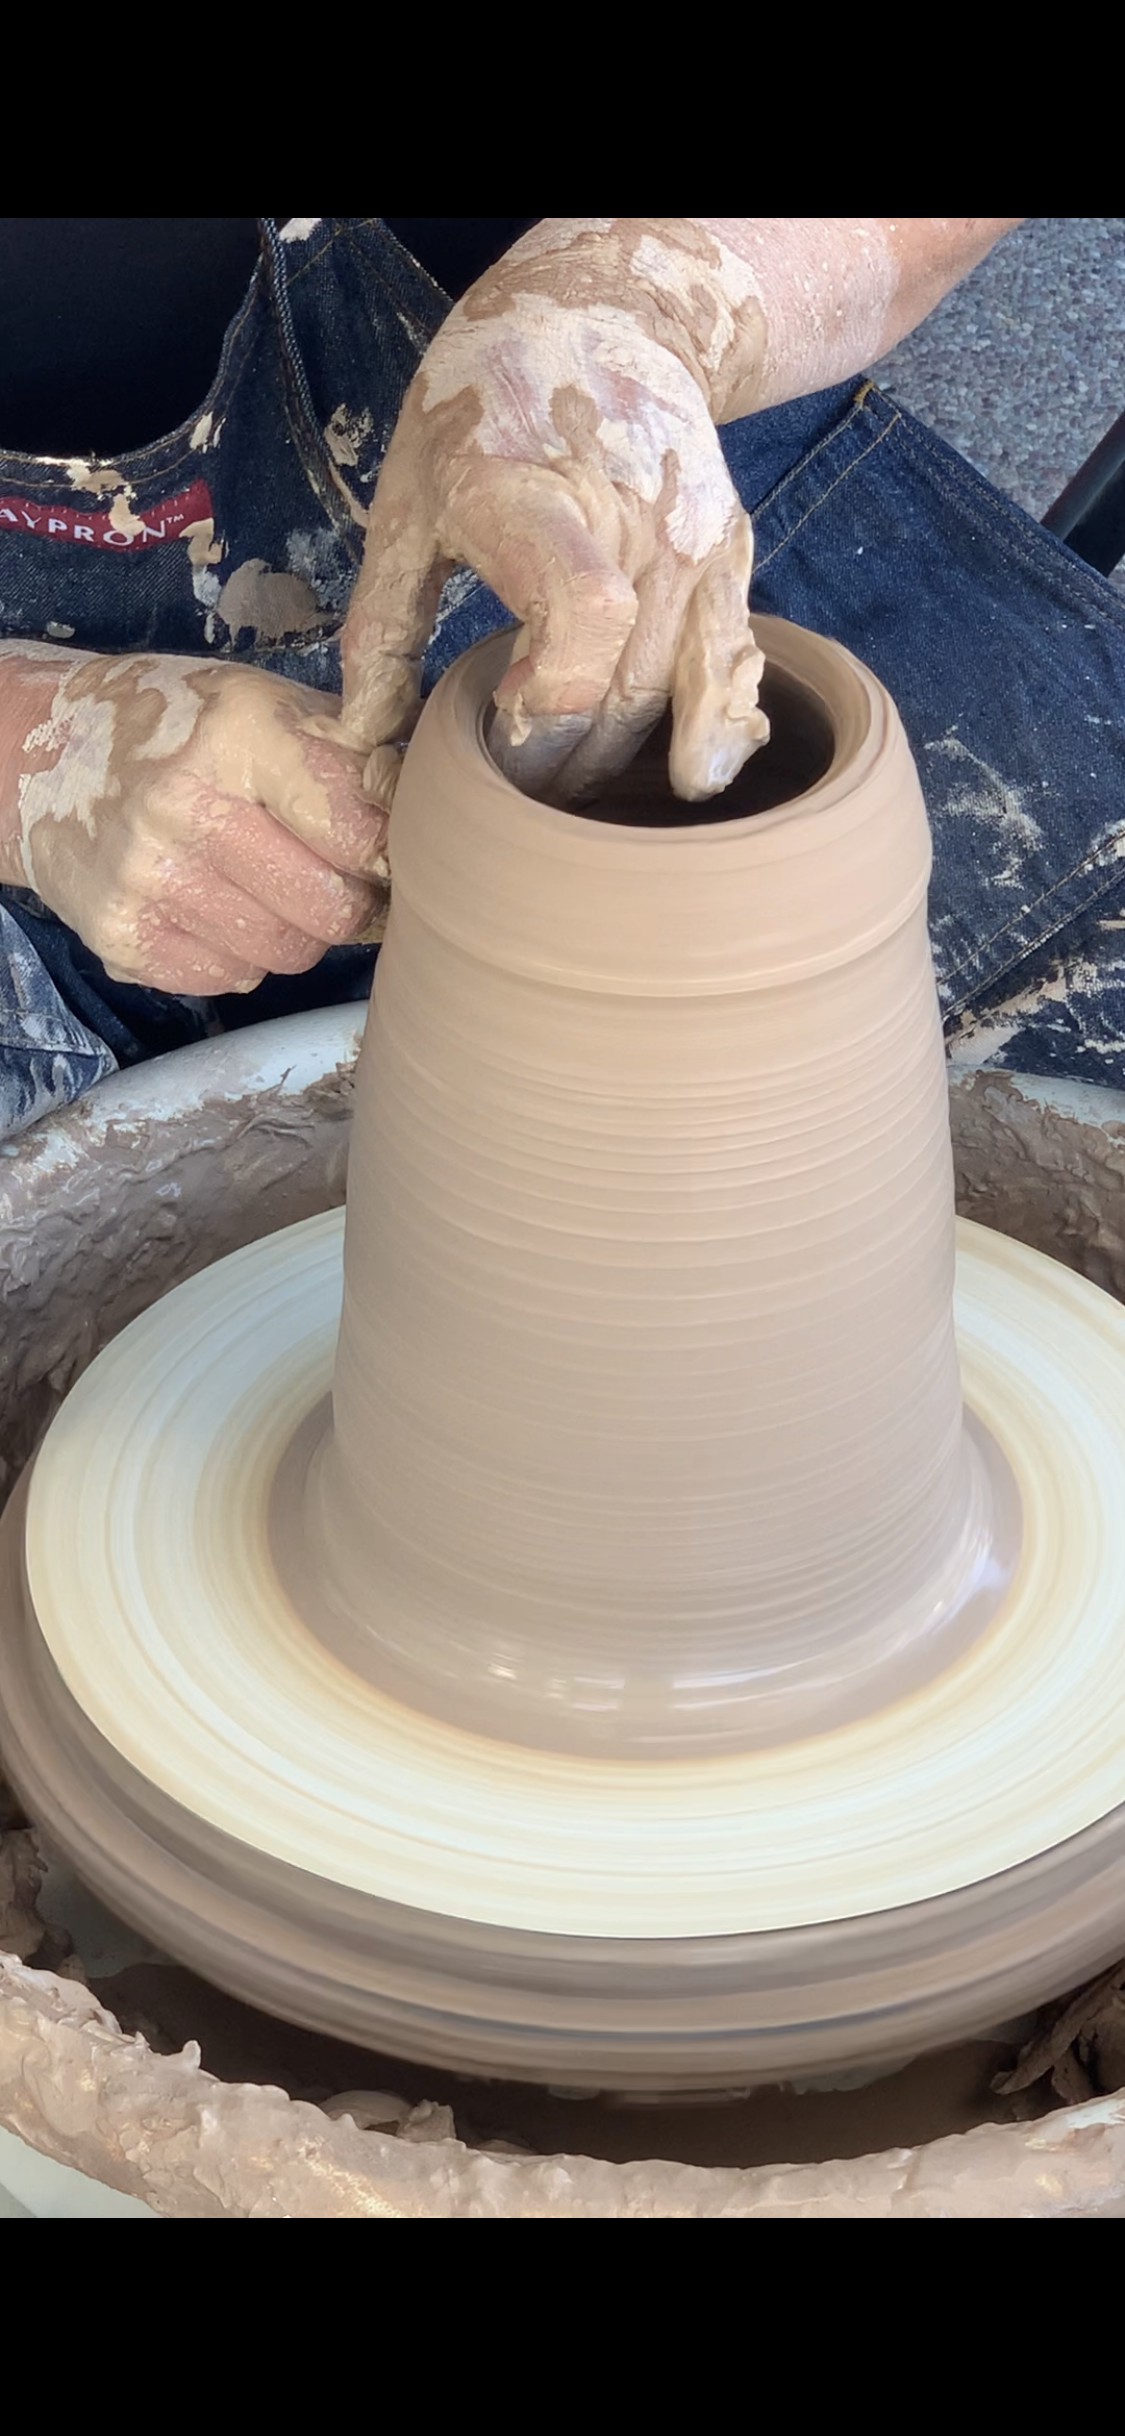 A potter throwing a clay pot on the wheel. Two hands are pulling the pot taller.